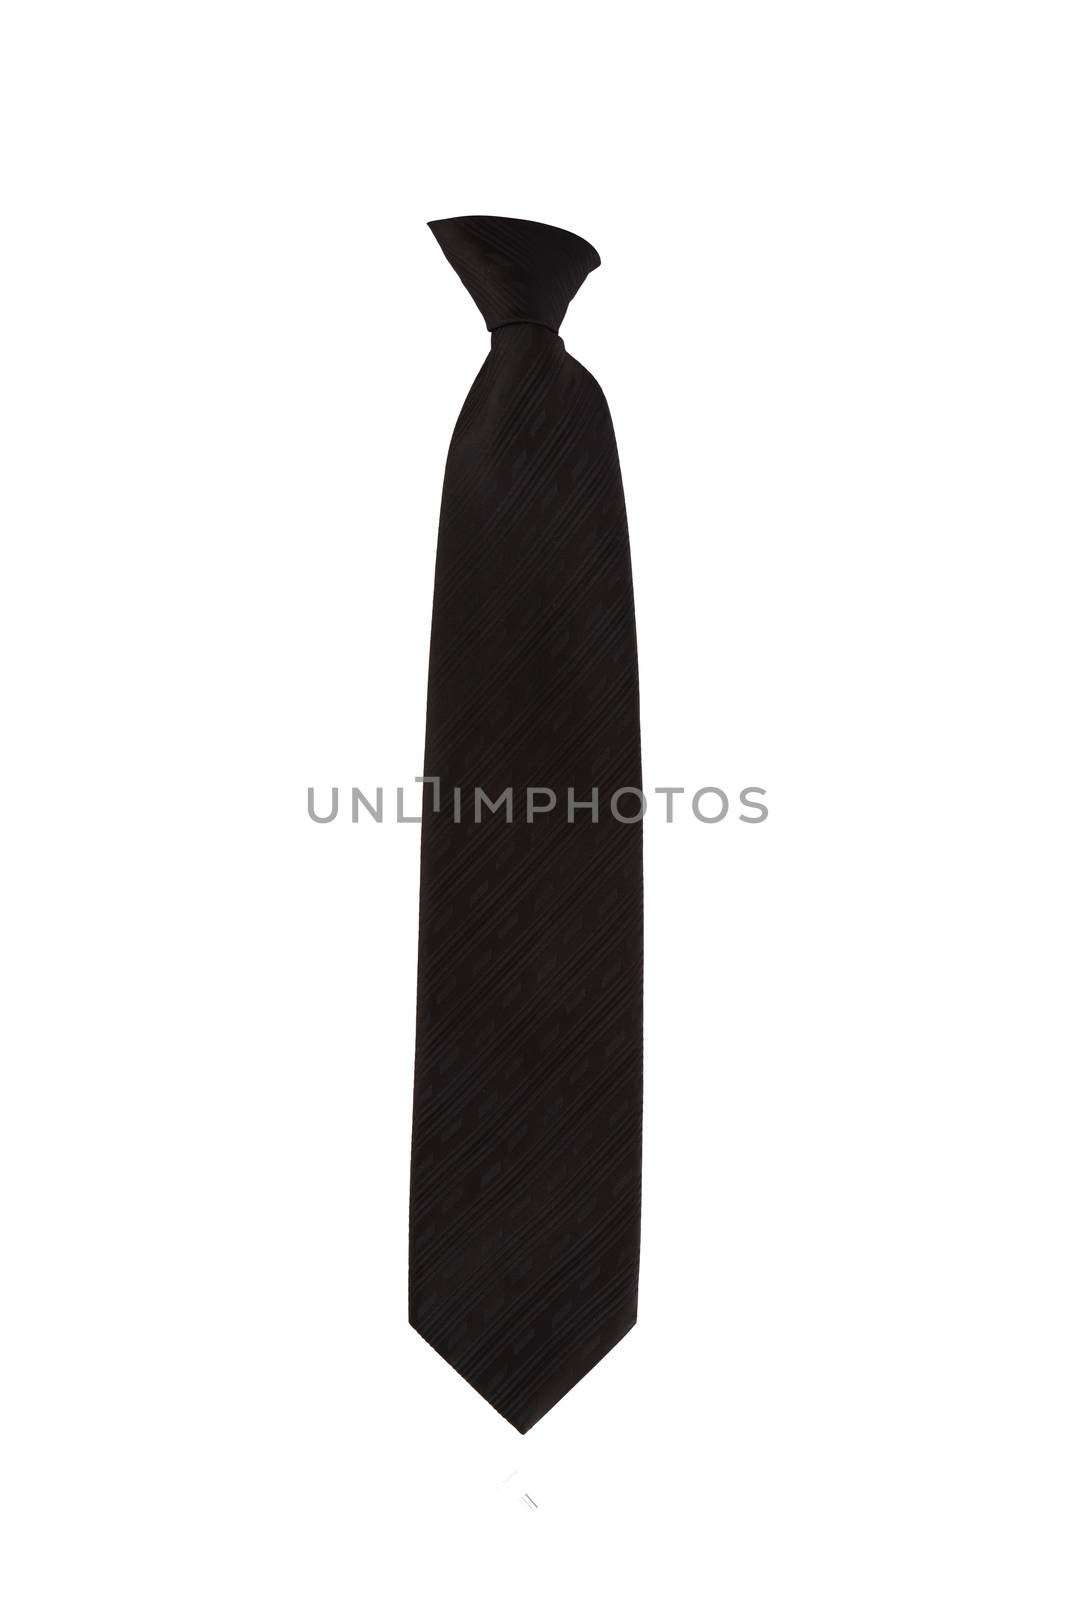 Close up front view of tied up black silk necktie, isolated on white background.